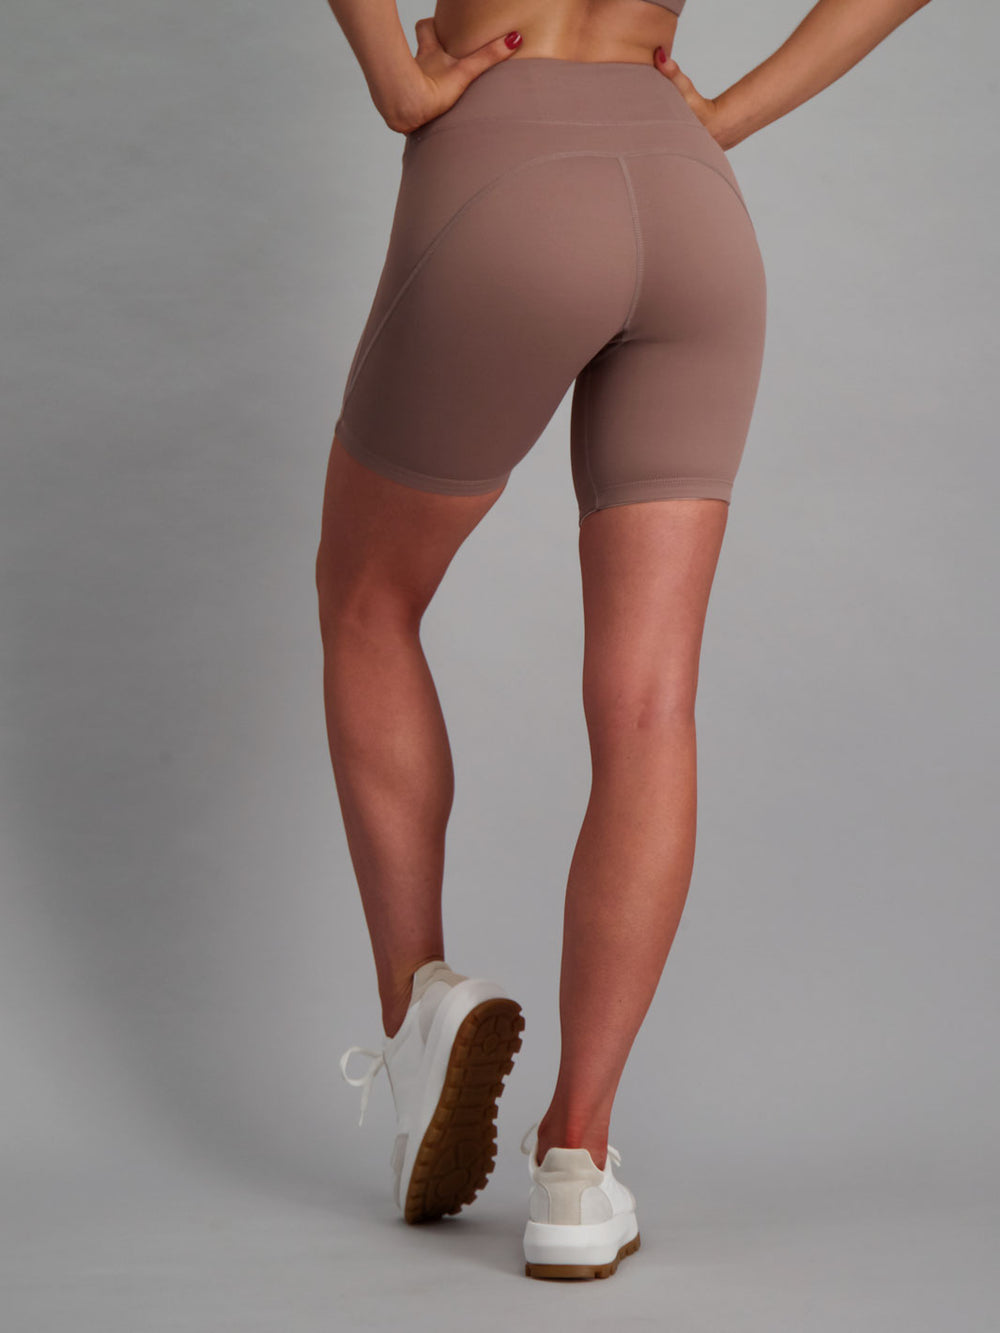 Latte colour activewear shorts with no-ride feature. 